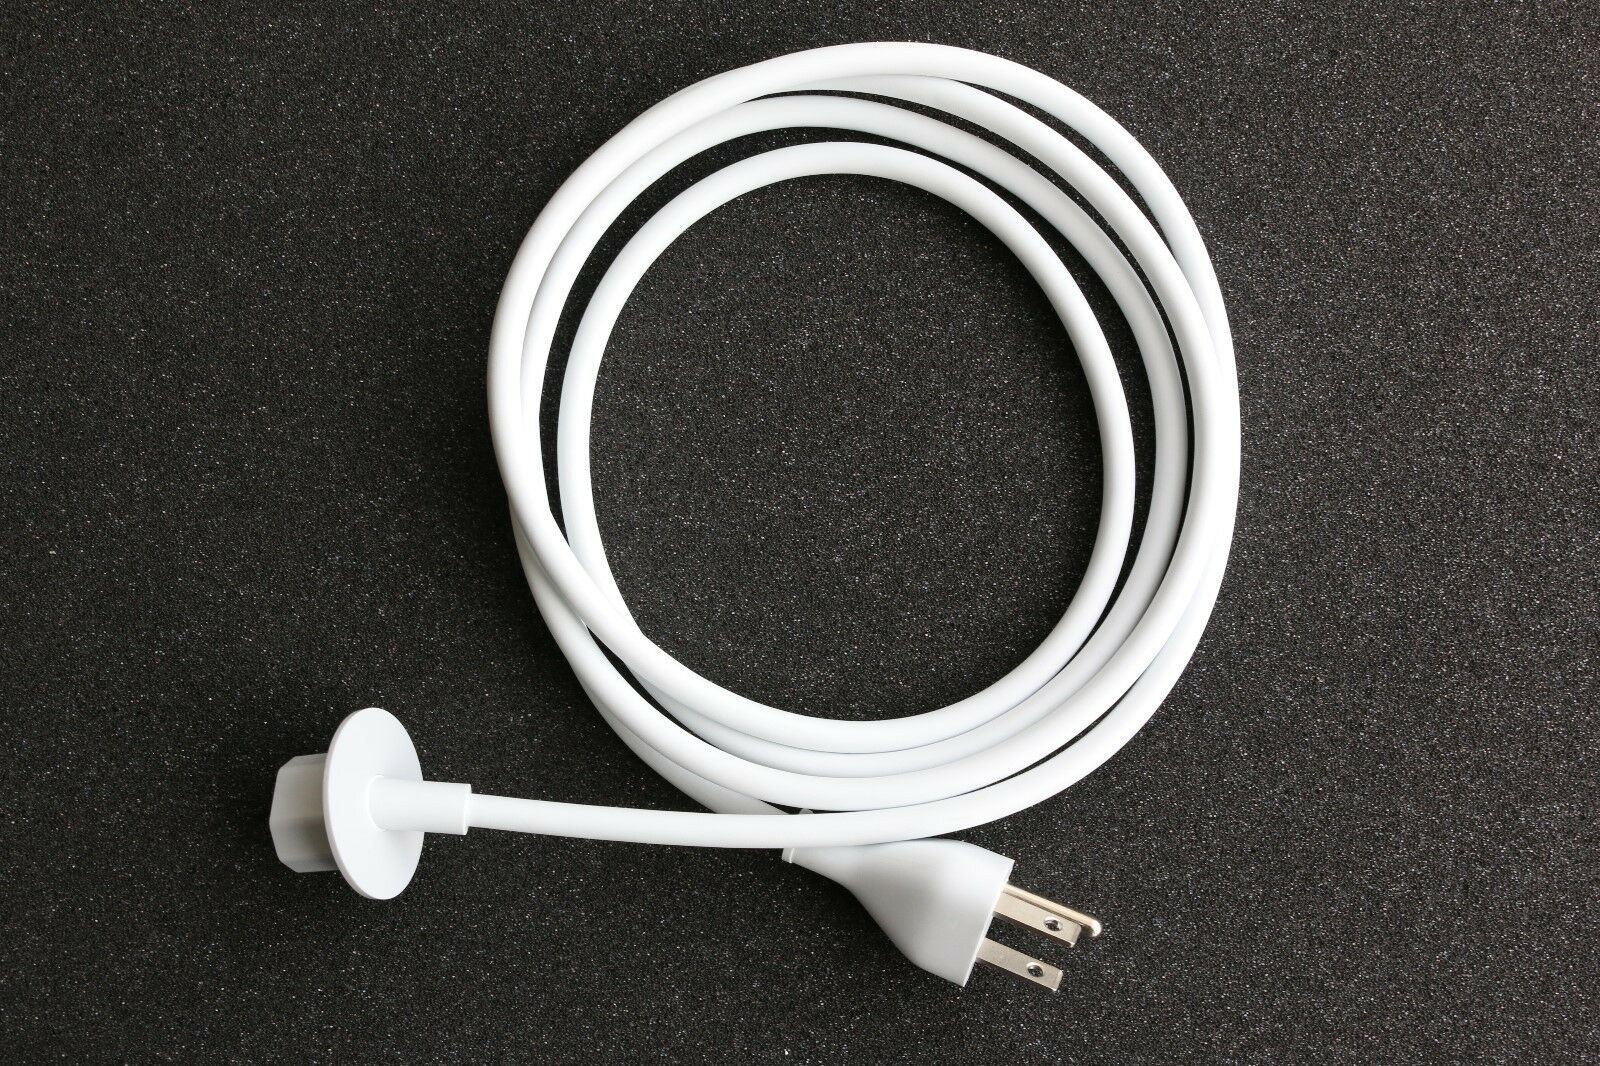 1x Genuine Late 2012 Apple iMac Power Cord Cable Excellent Condition